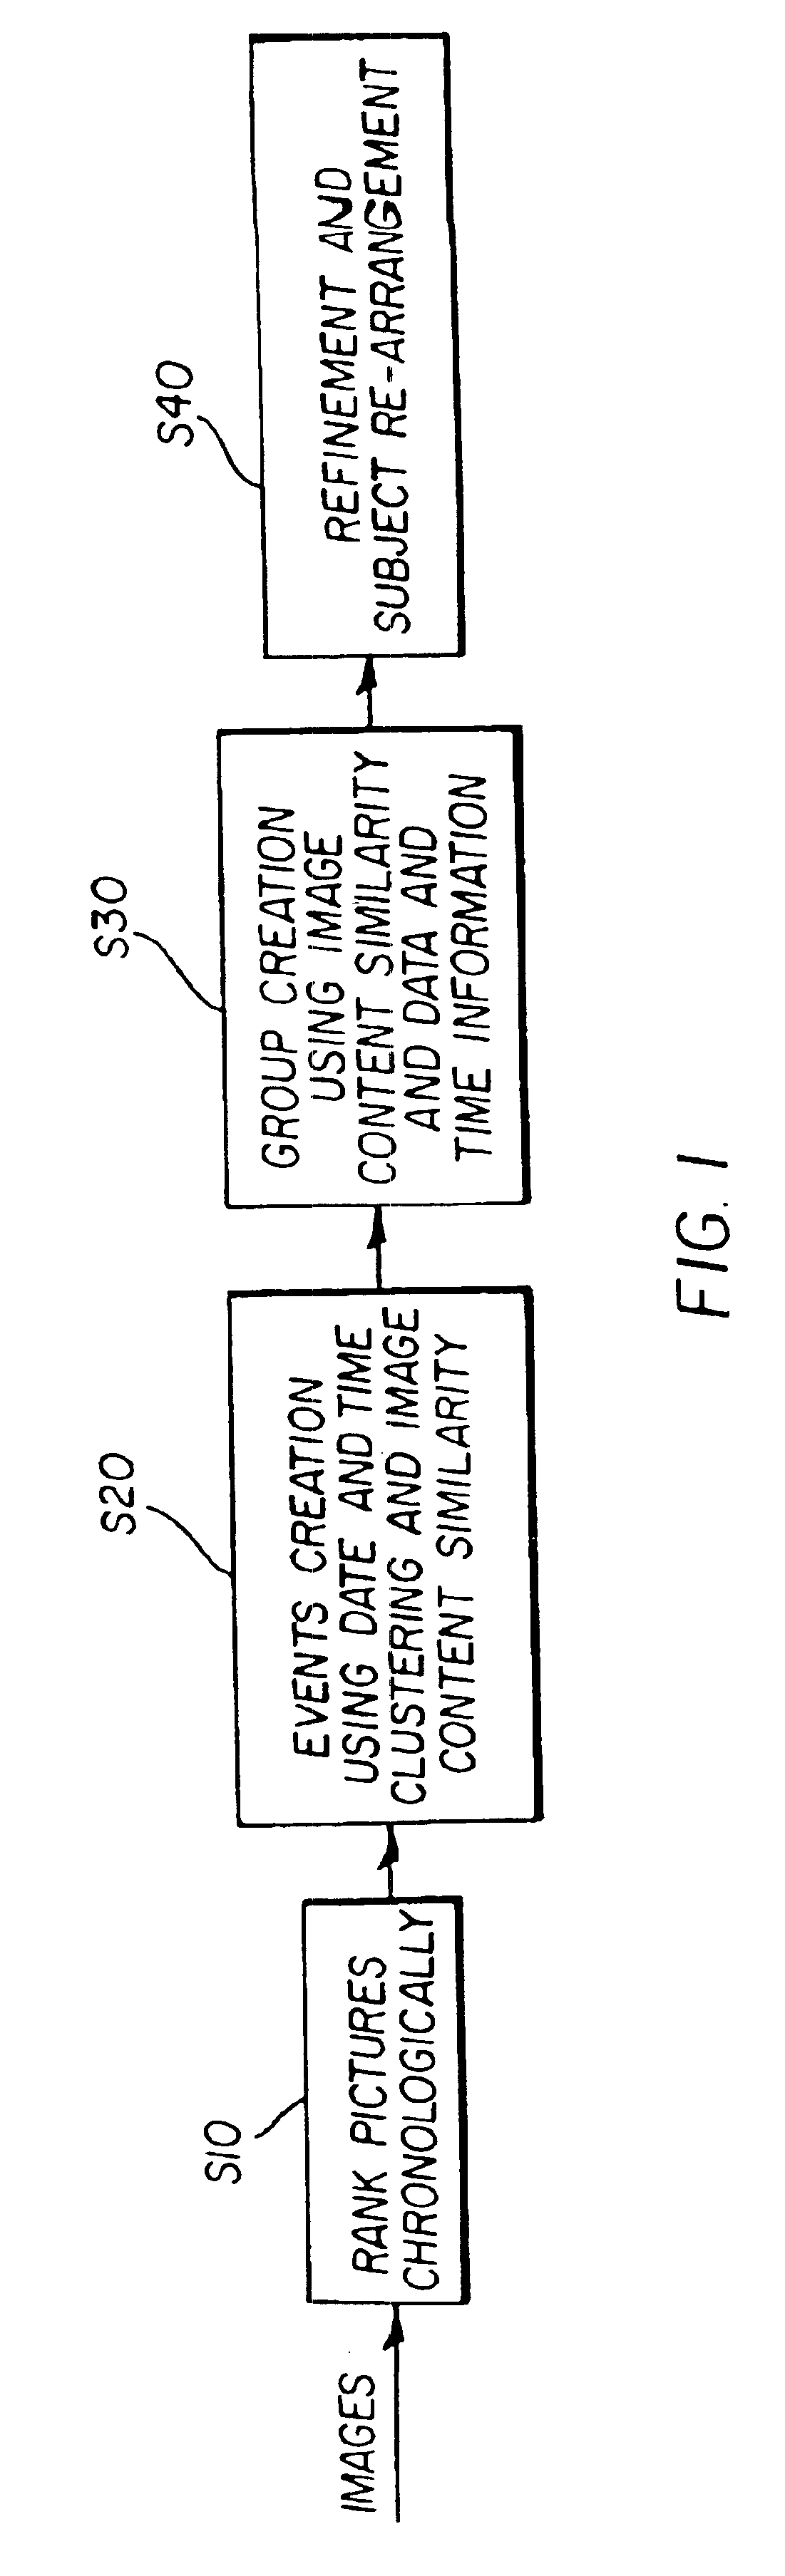 Method for automatically classifying images into events in a multimedia authoring application